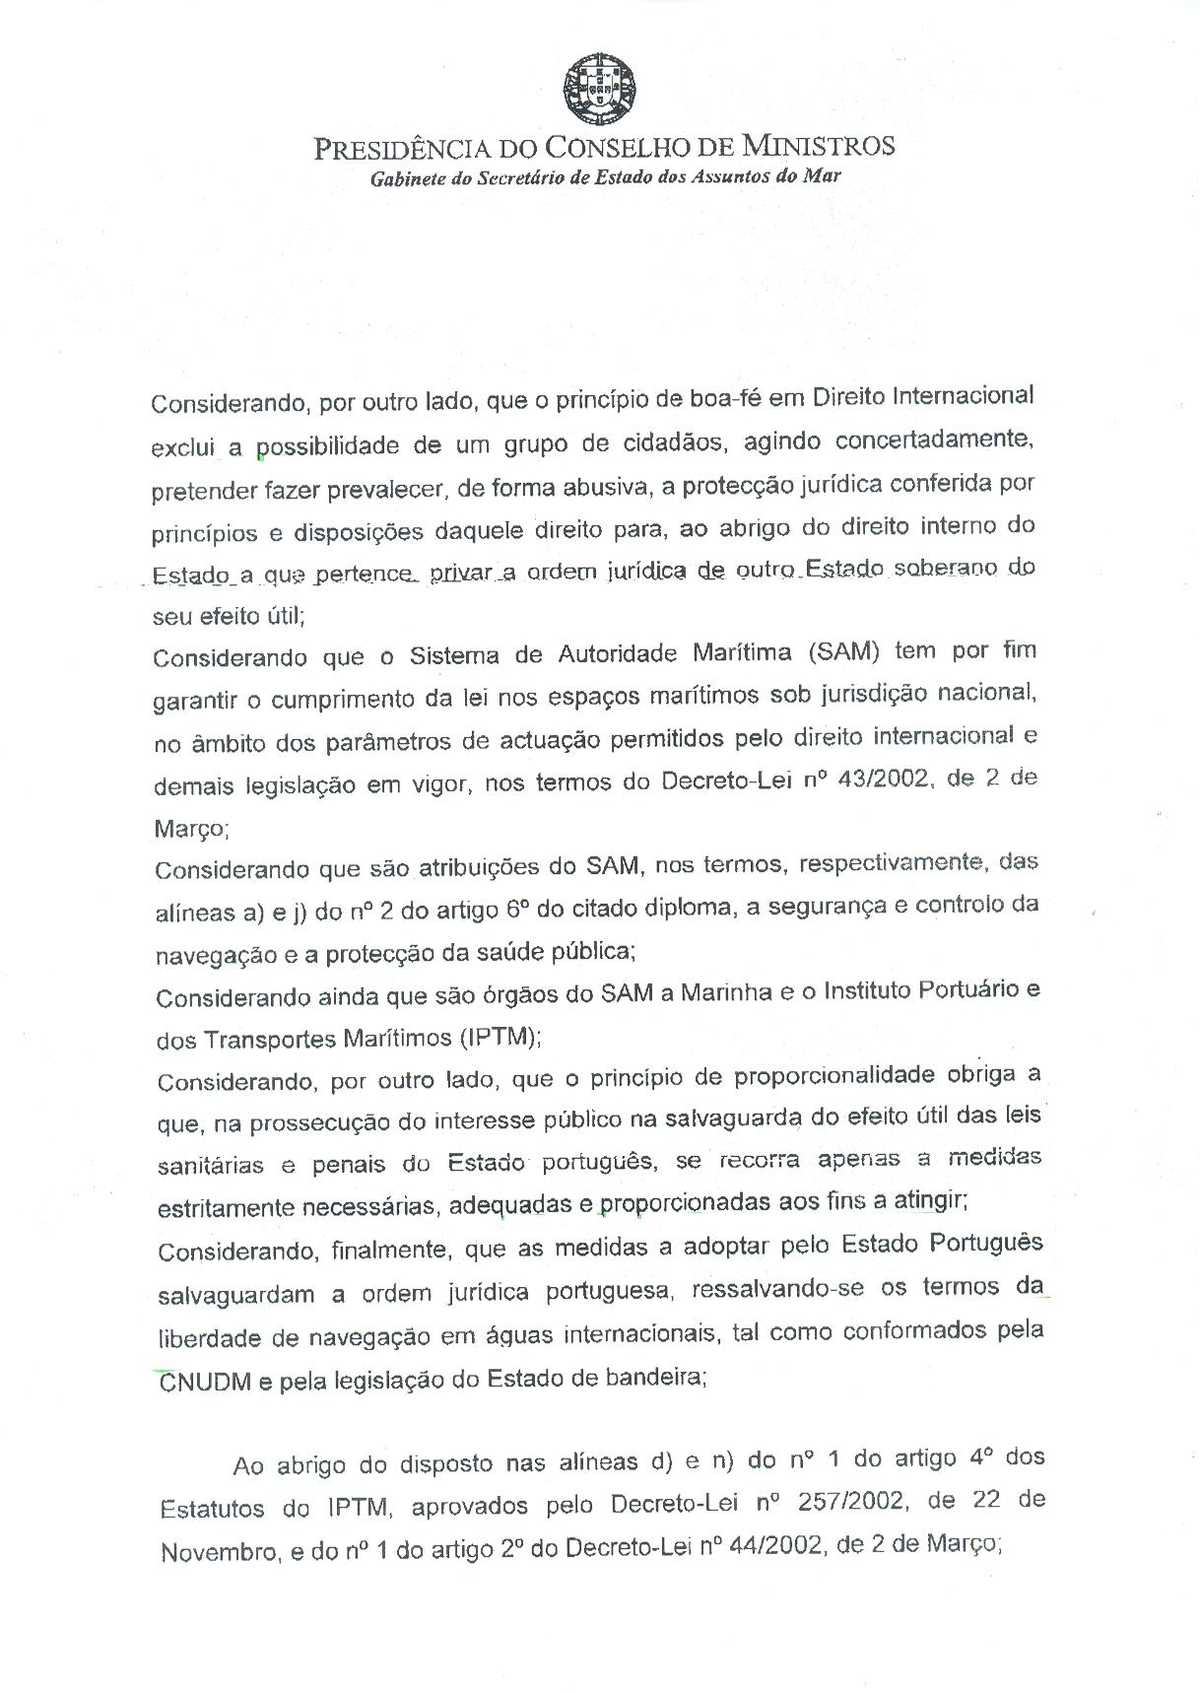 Statement nr. 0010/SEAM/2004 from the Presidency of the Council of Ministers of Portugal. Page 2